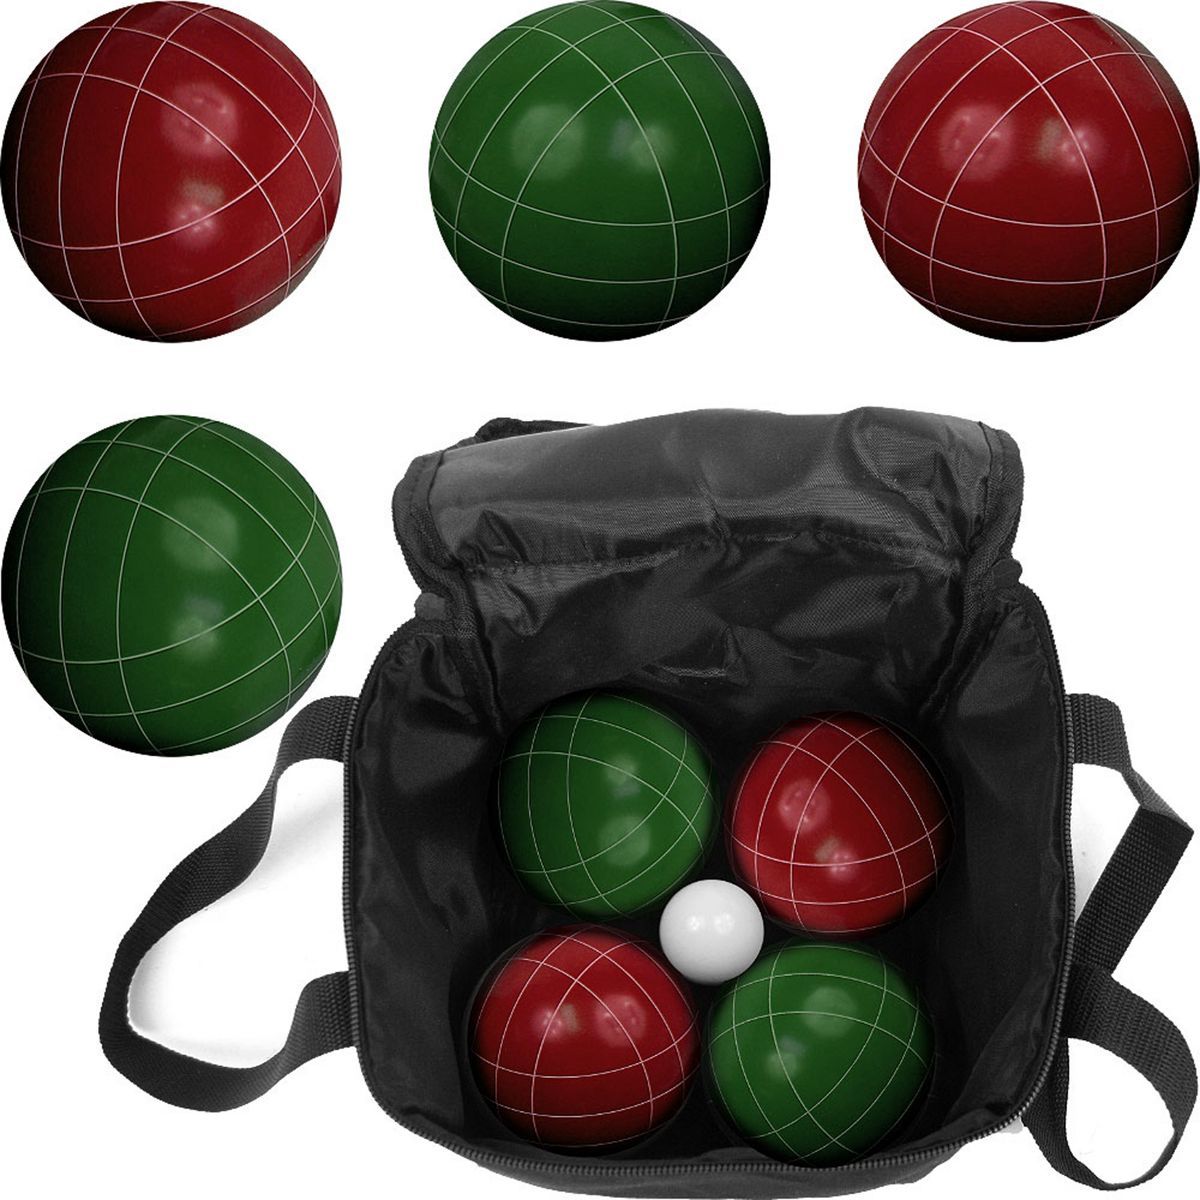 Toy Time Regulation Outdoor Bocce Ball Set With Carrying Case | Target